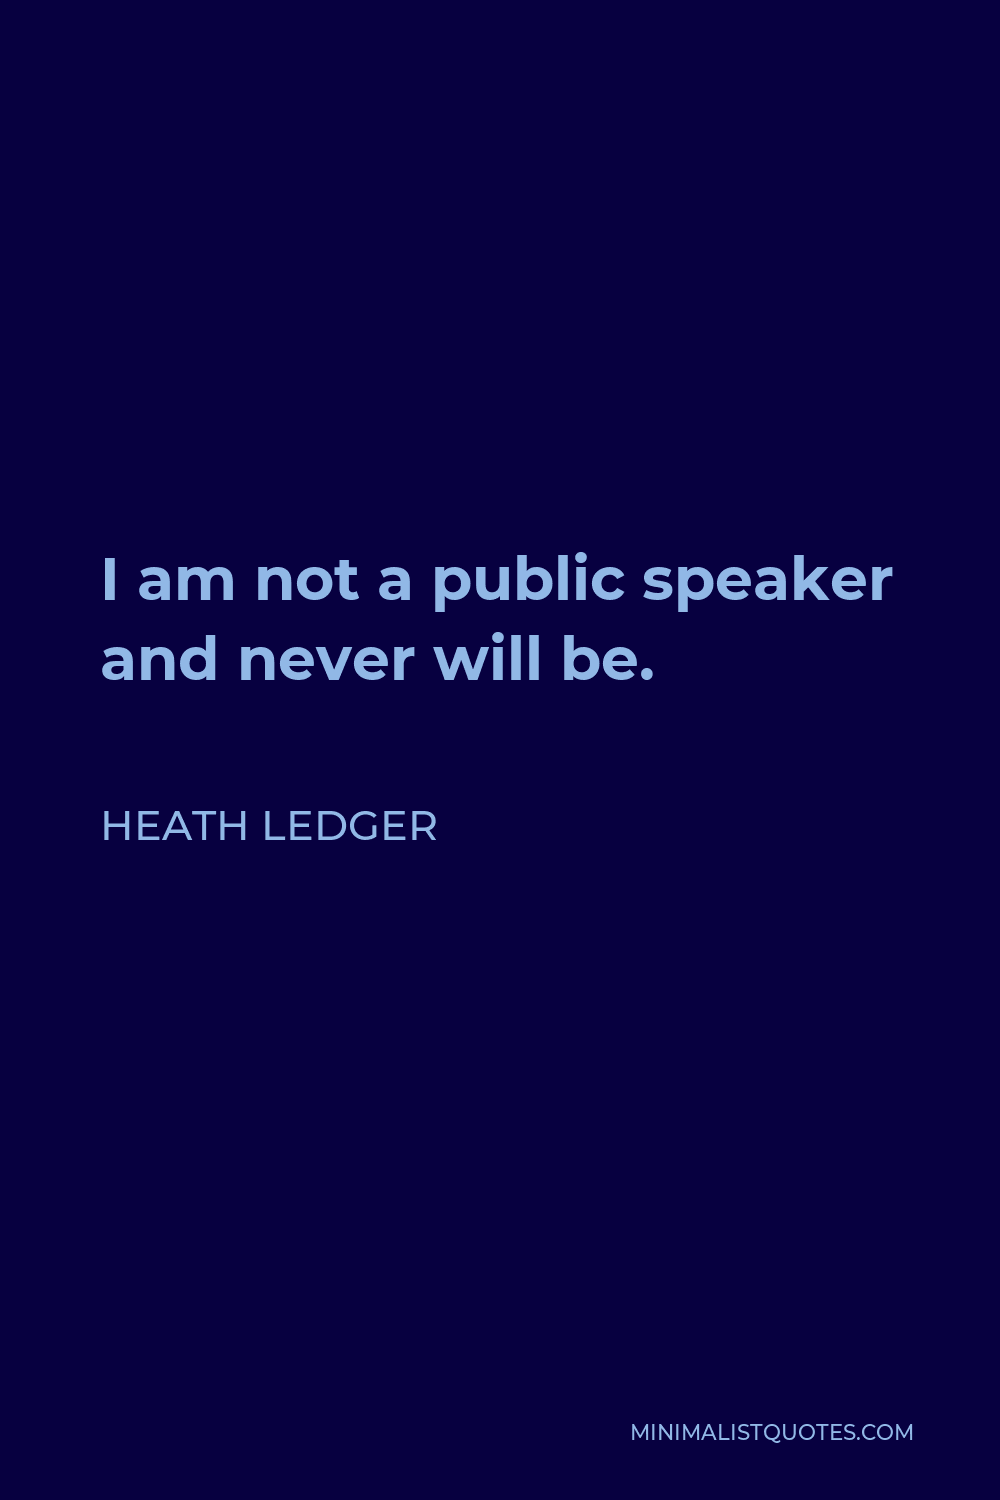 Heath Ledger Quote - I am not a public speaker and never will be.